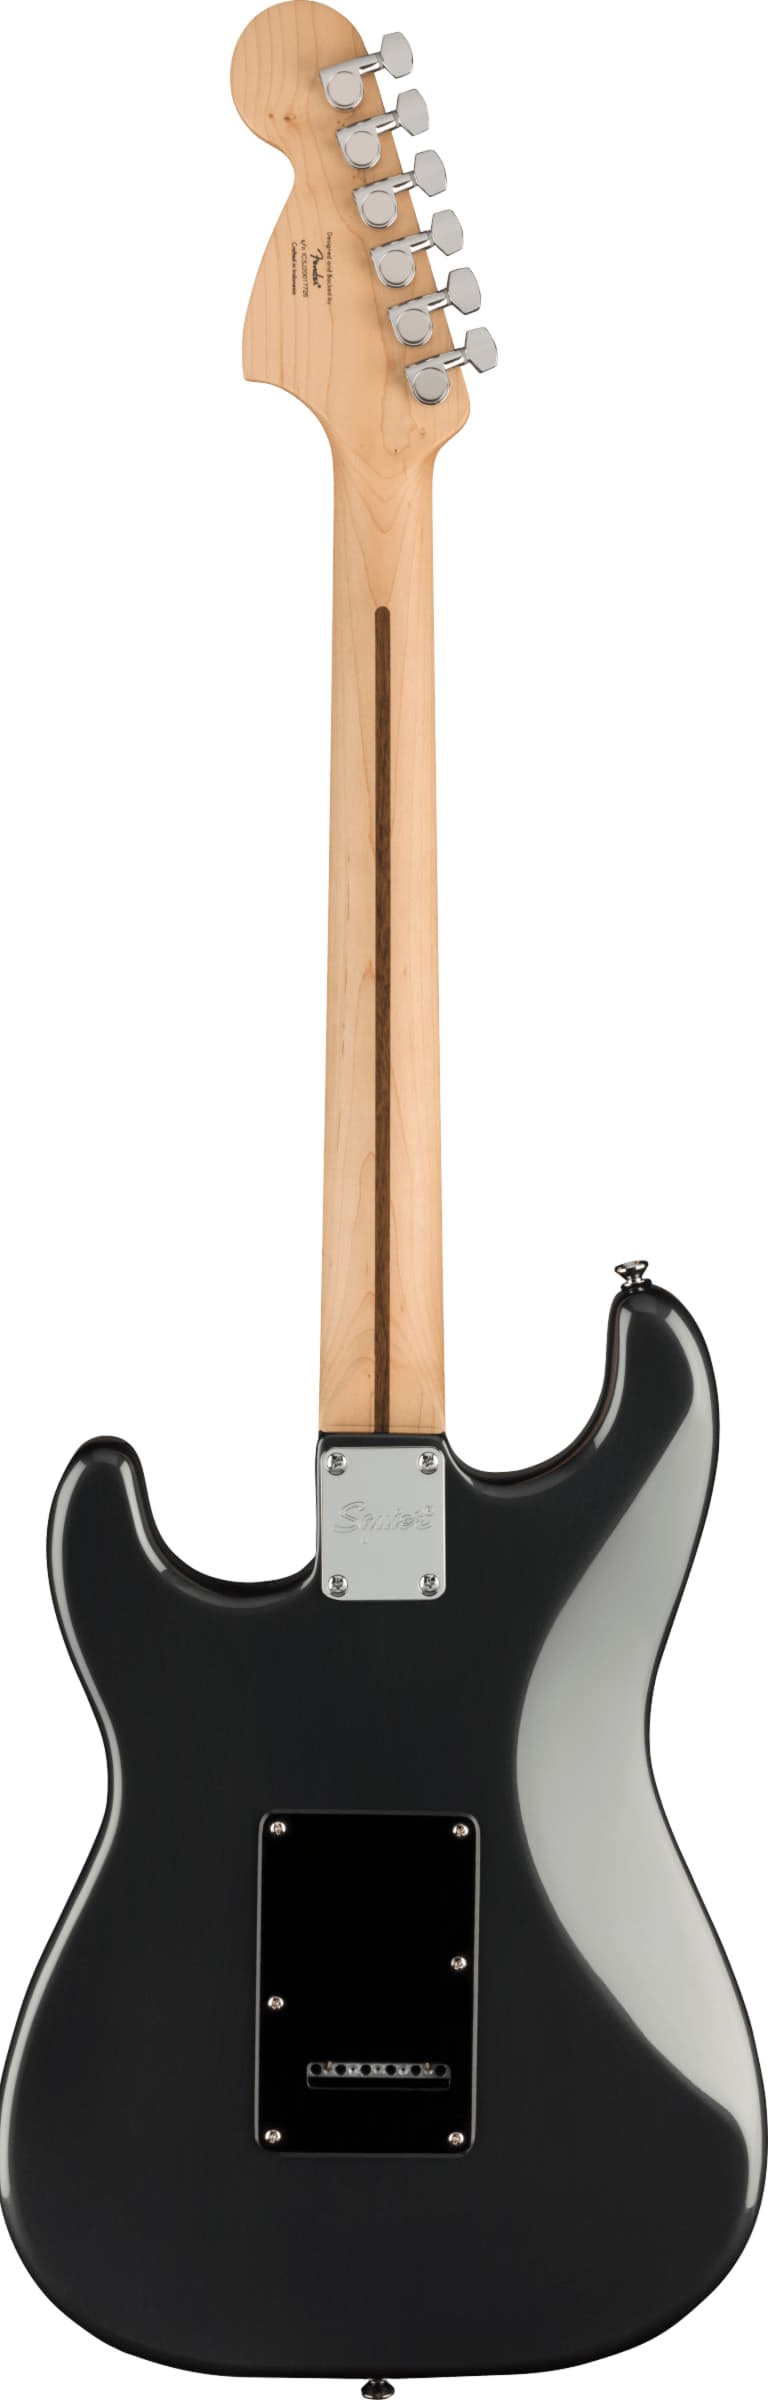 Fender Squier Affinity 2021 Stratocaster HSS Pack LRL Charcoal Frost Metallic по цене 56 100 ₽